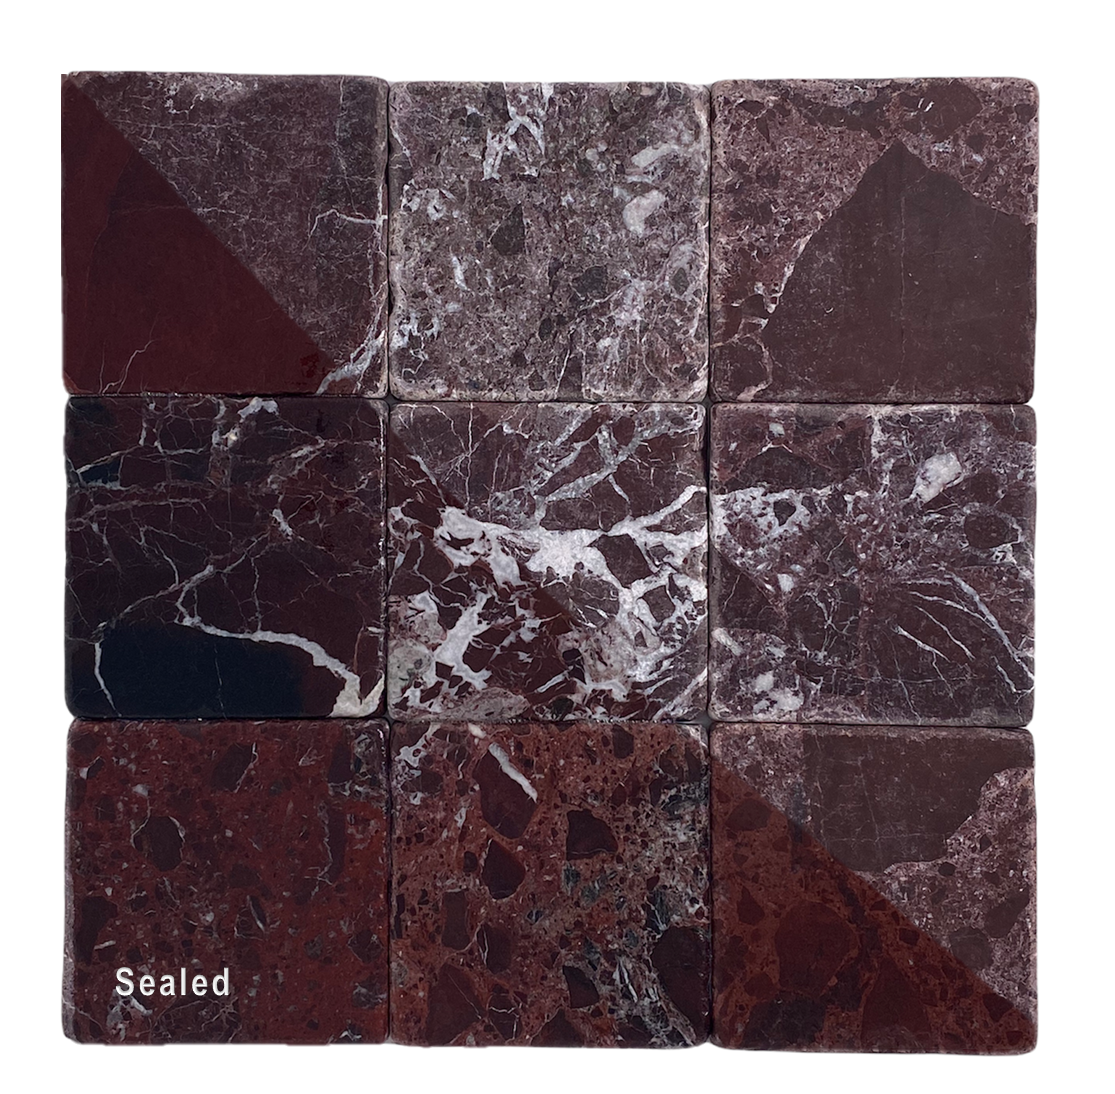 Rosso Levanto Burgundy Cherry Wine Color Rosa Marquina Marble 4x4 Inch Antique Tumbled Finish Floor Wall Tile for Fireplace Surround, Kitchen Backsplashes, Exterior Interior Tile, Coaster Handcraft